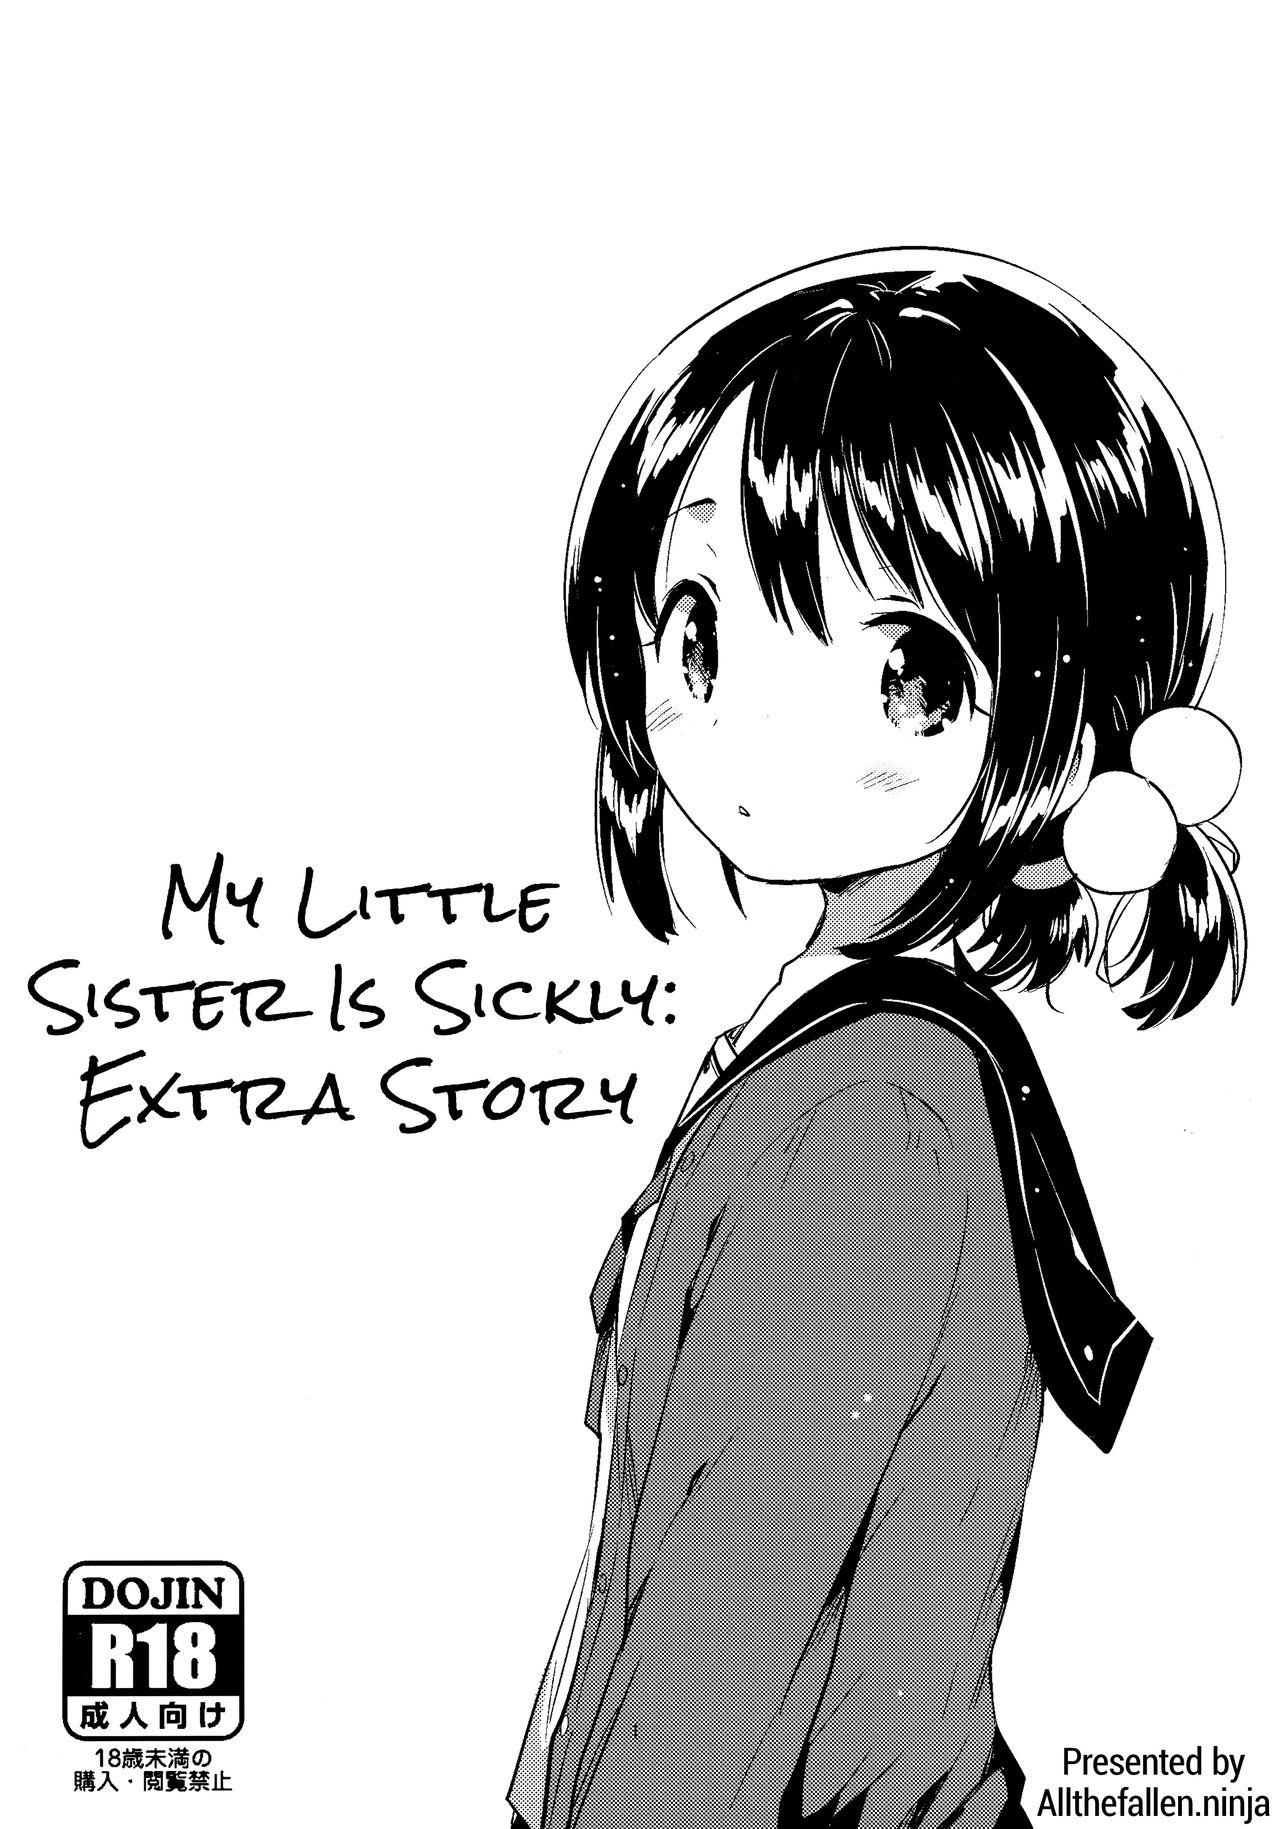 Imouto wa Sickness no Omake | My Little Sister is Sickly: Extra Story 1